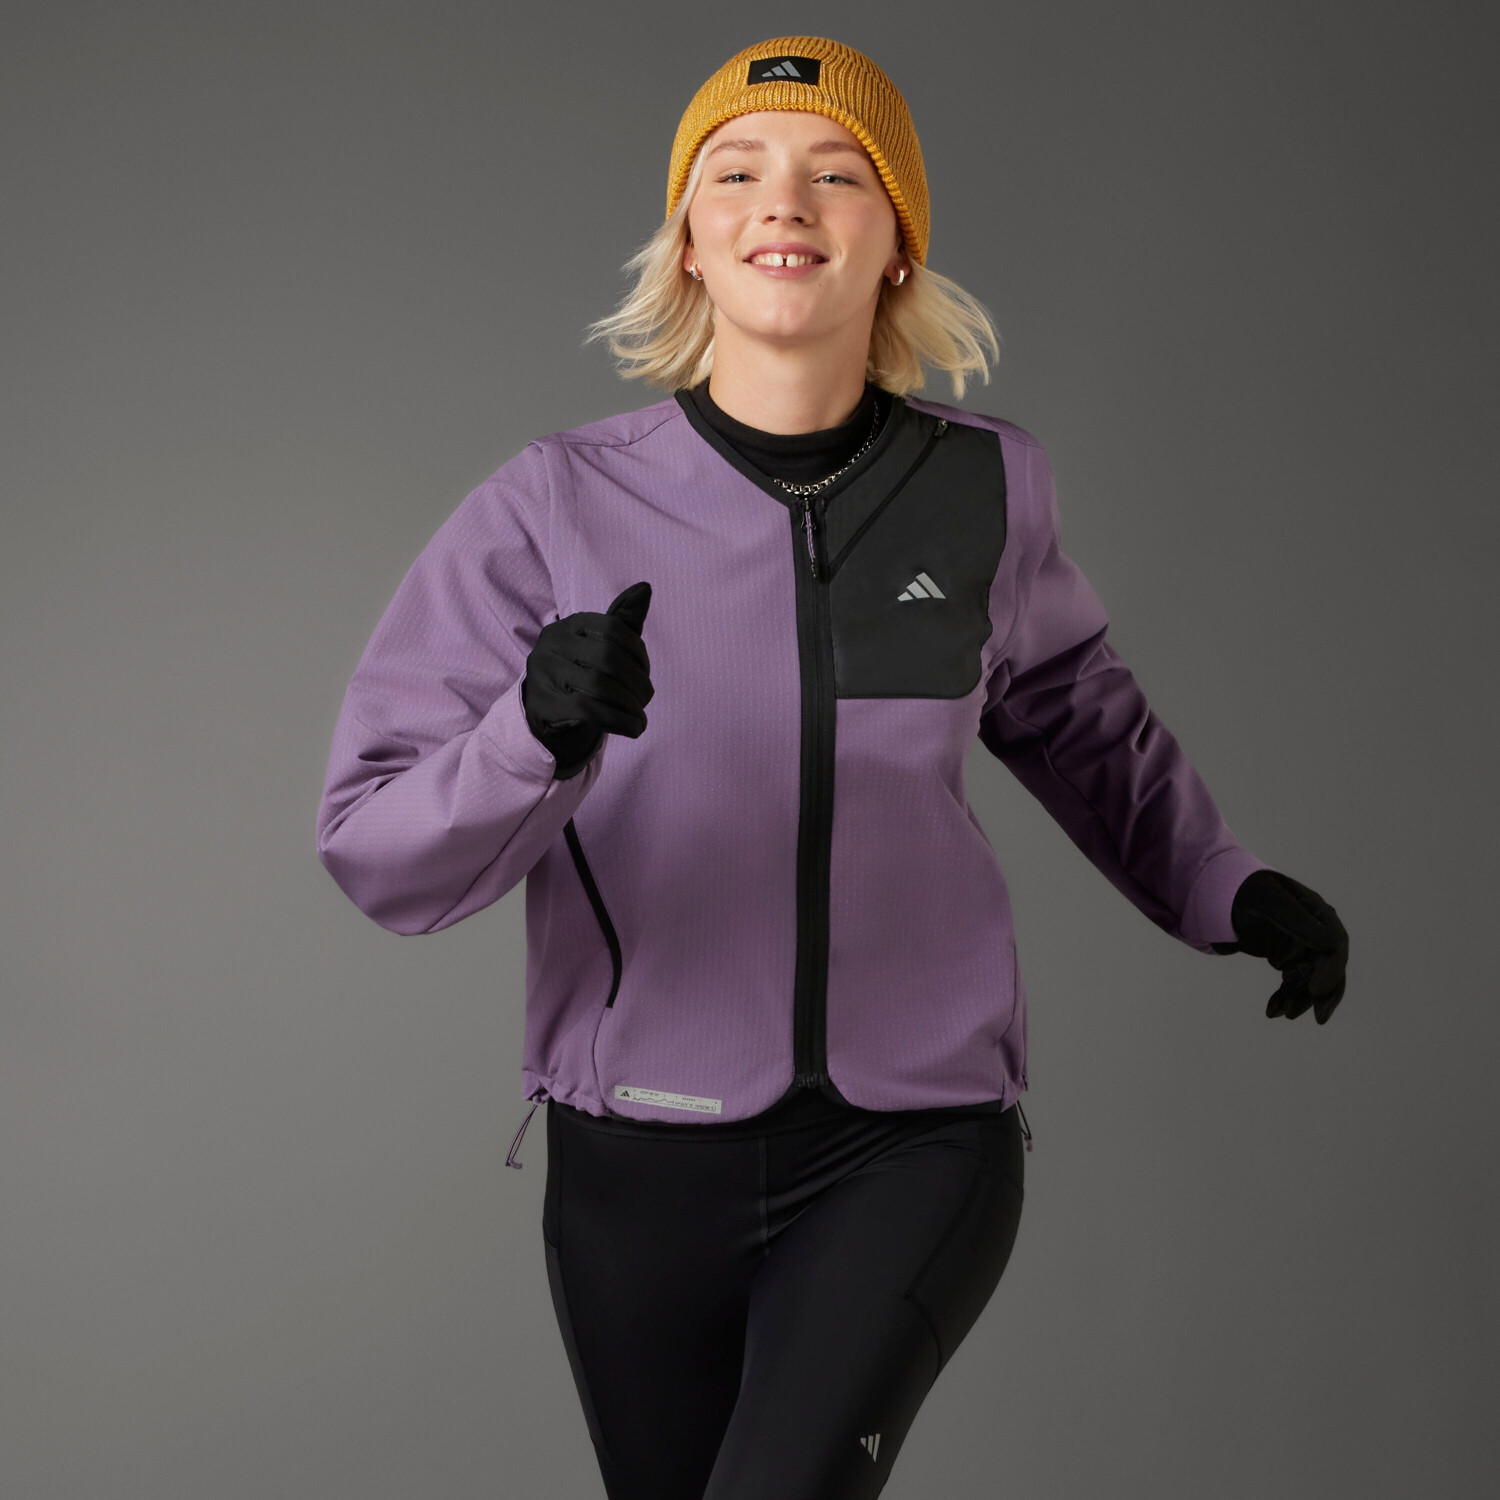 Adidas Ultimate Running Conquer the Elements Running COLD.RDY violet € ab (IM1916) shadow Jacket bei 69,99 Preisvergleich 